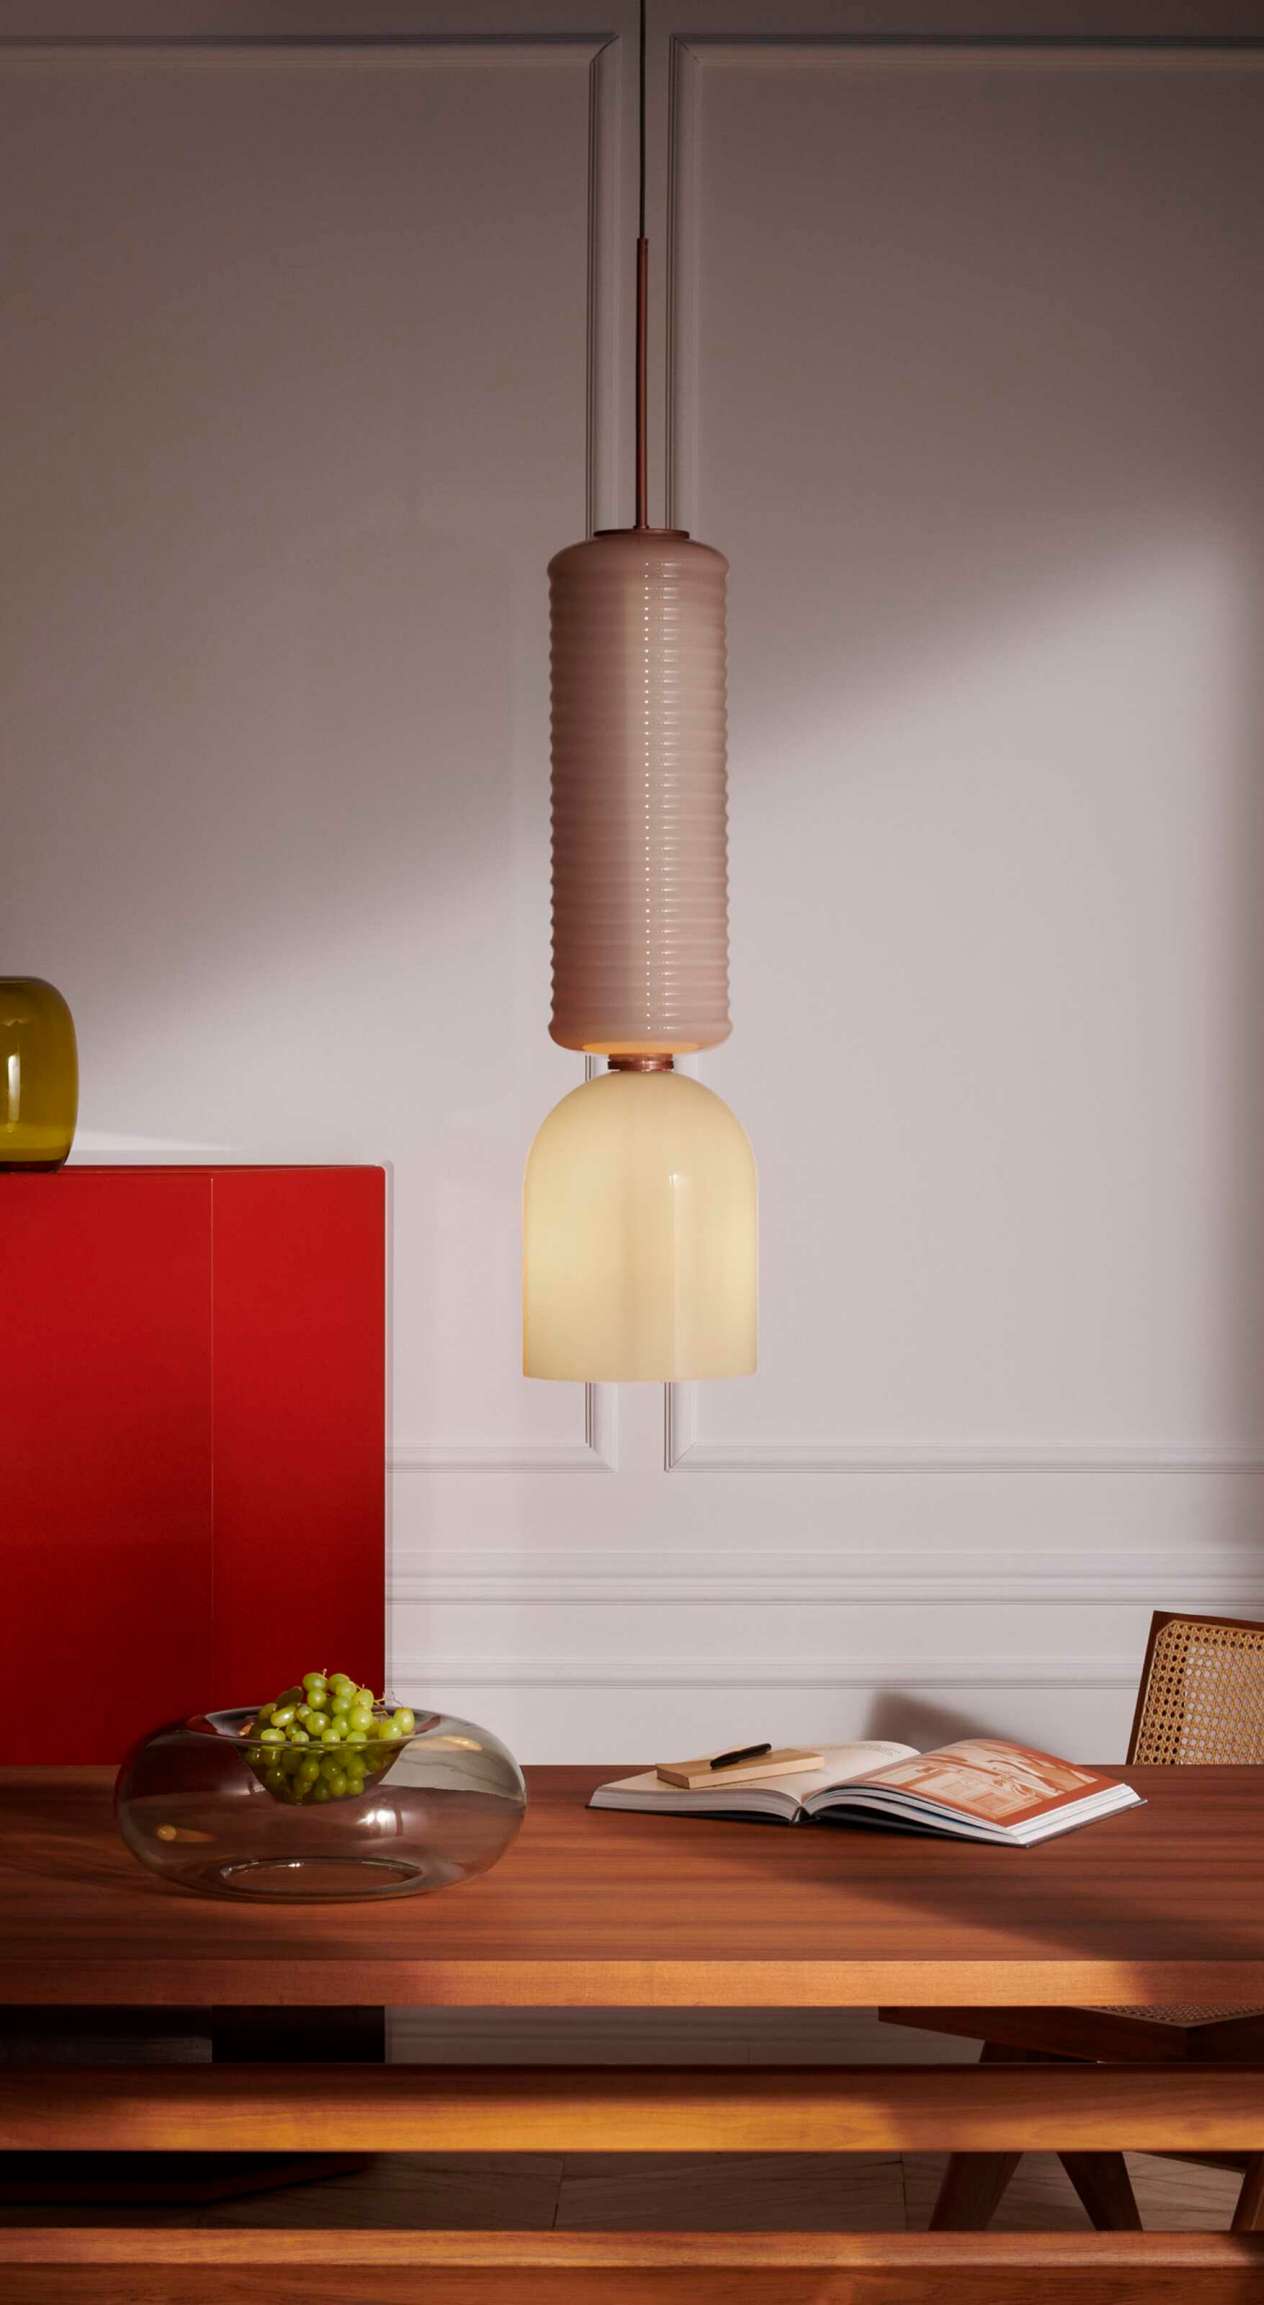 Electra Lamp, Design by Cassina